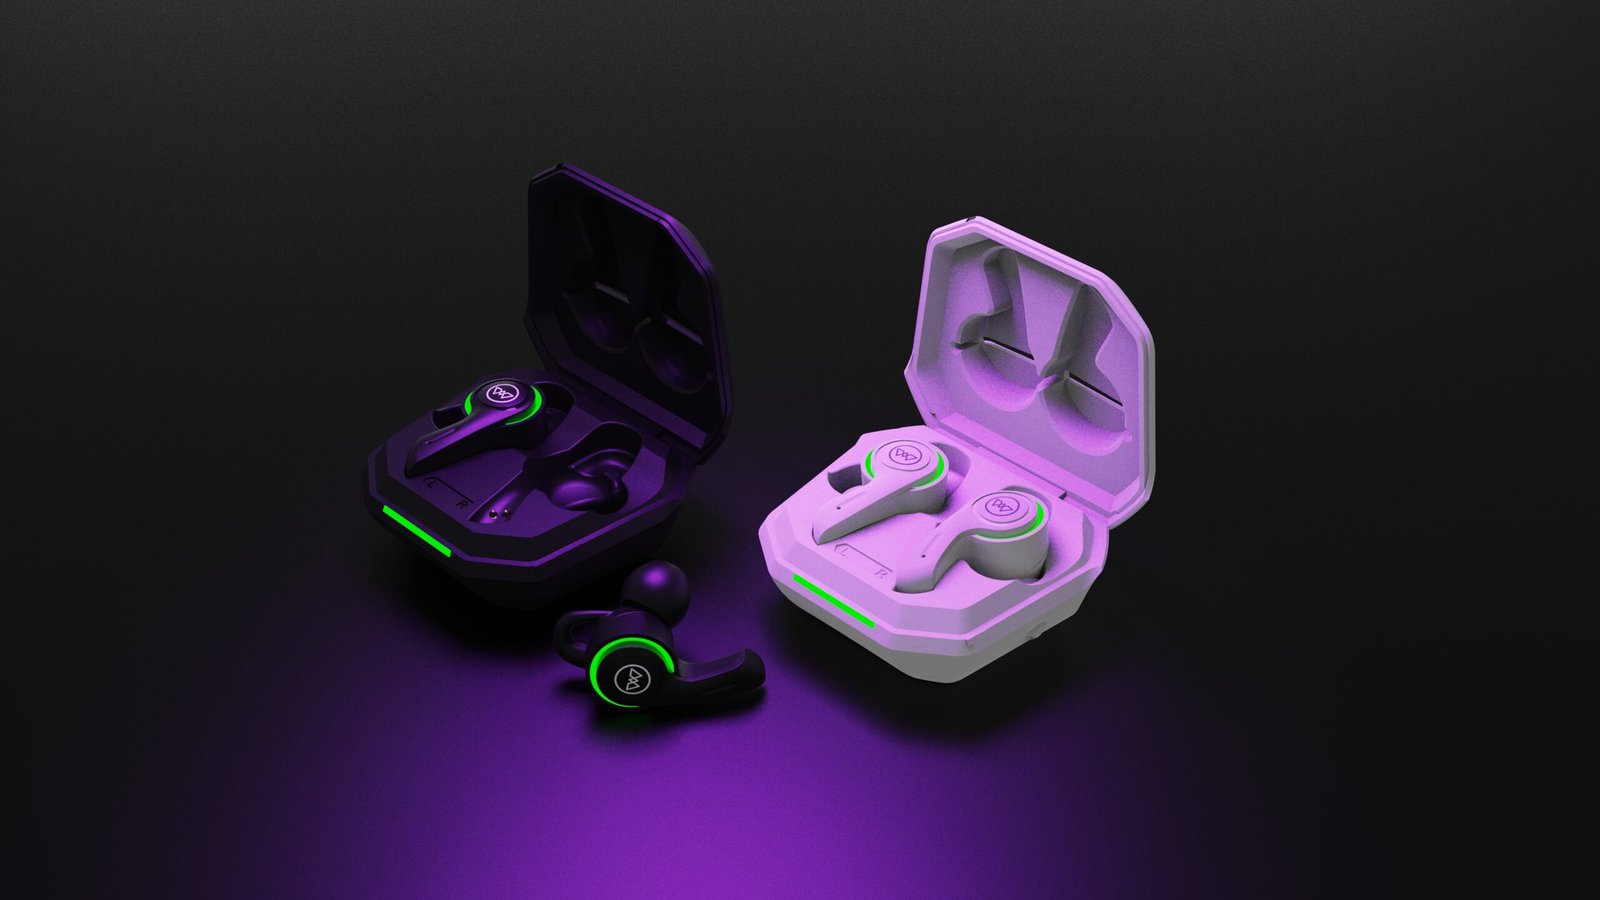 Wings announces the impressive phantom 200 TWS gaming earbuds.